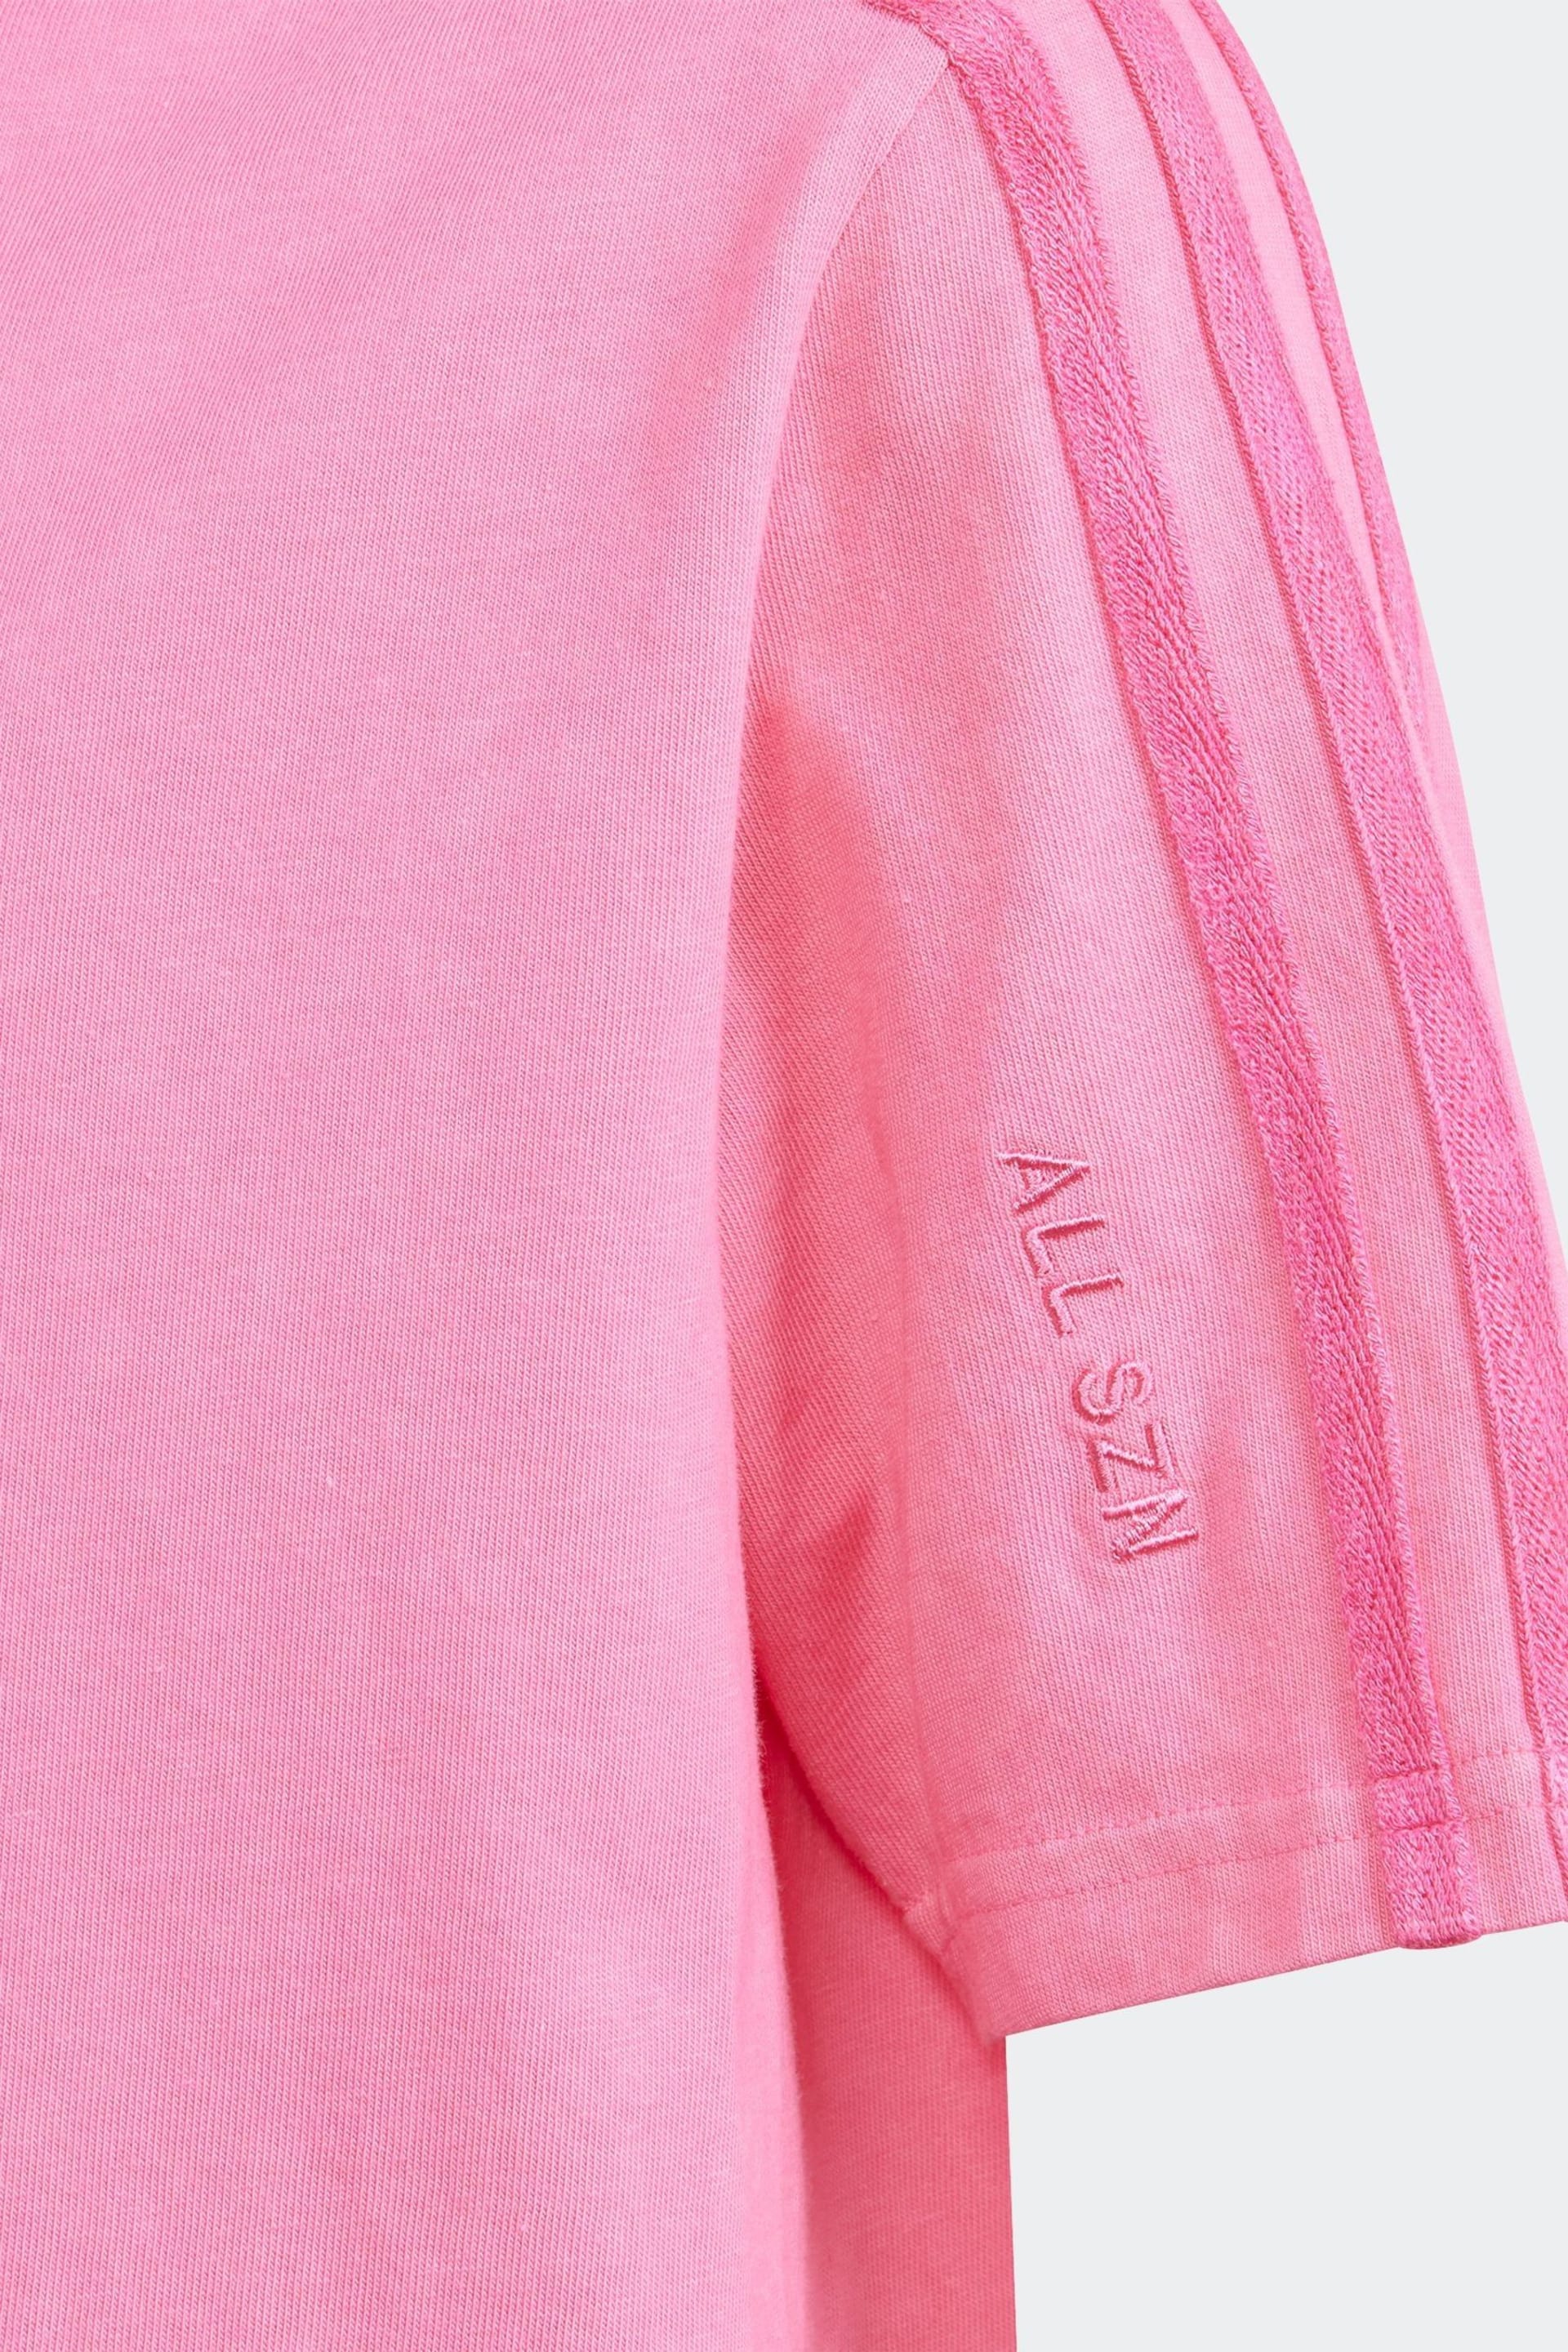 adidas Pink Kids Sportswear All Szn Washed T-Shirt - Image 4 of 5